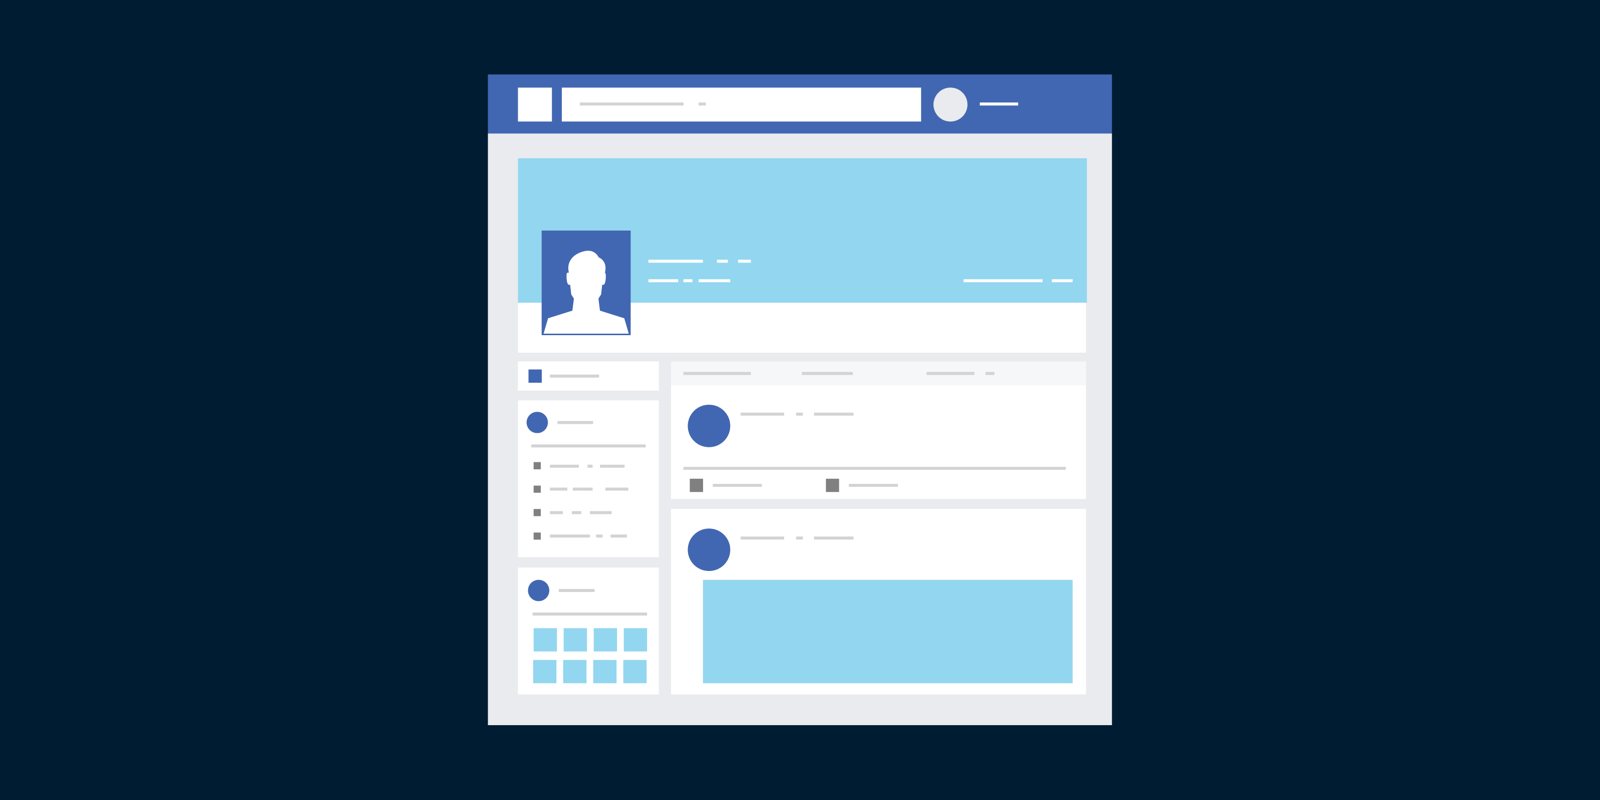 How to create a Facebook page in 5 easy steps